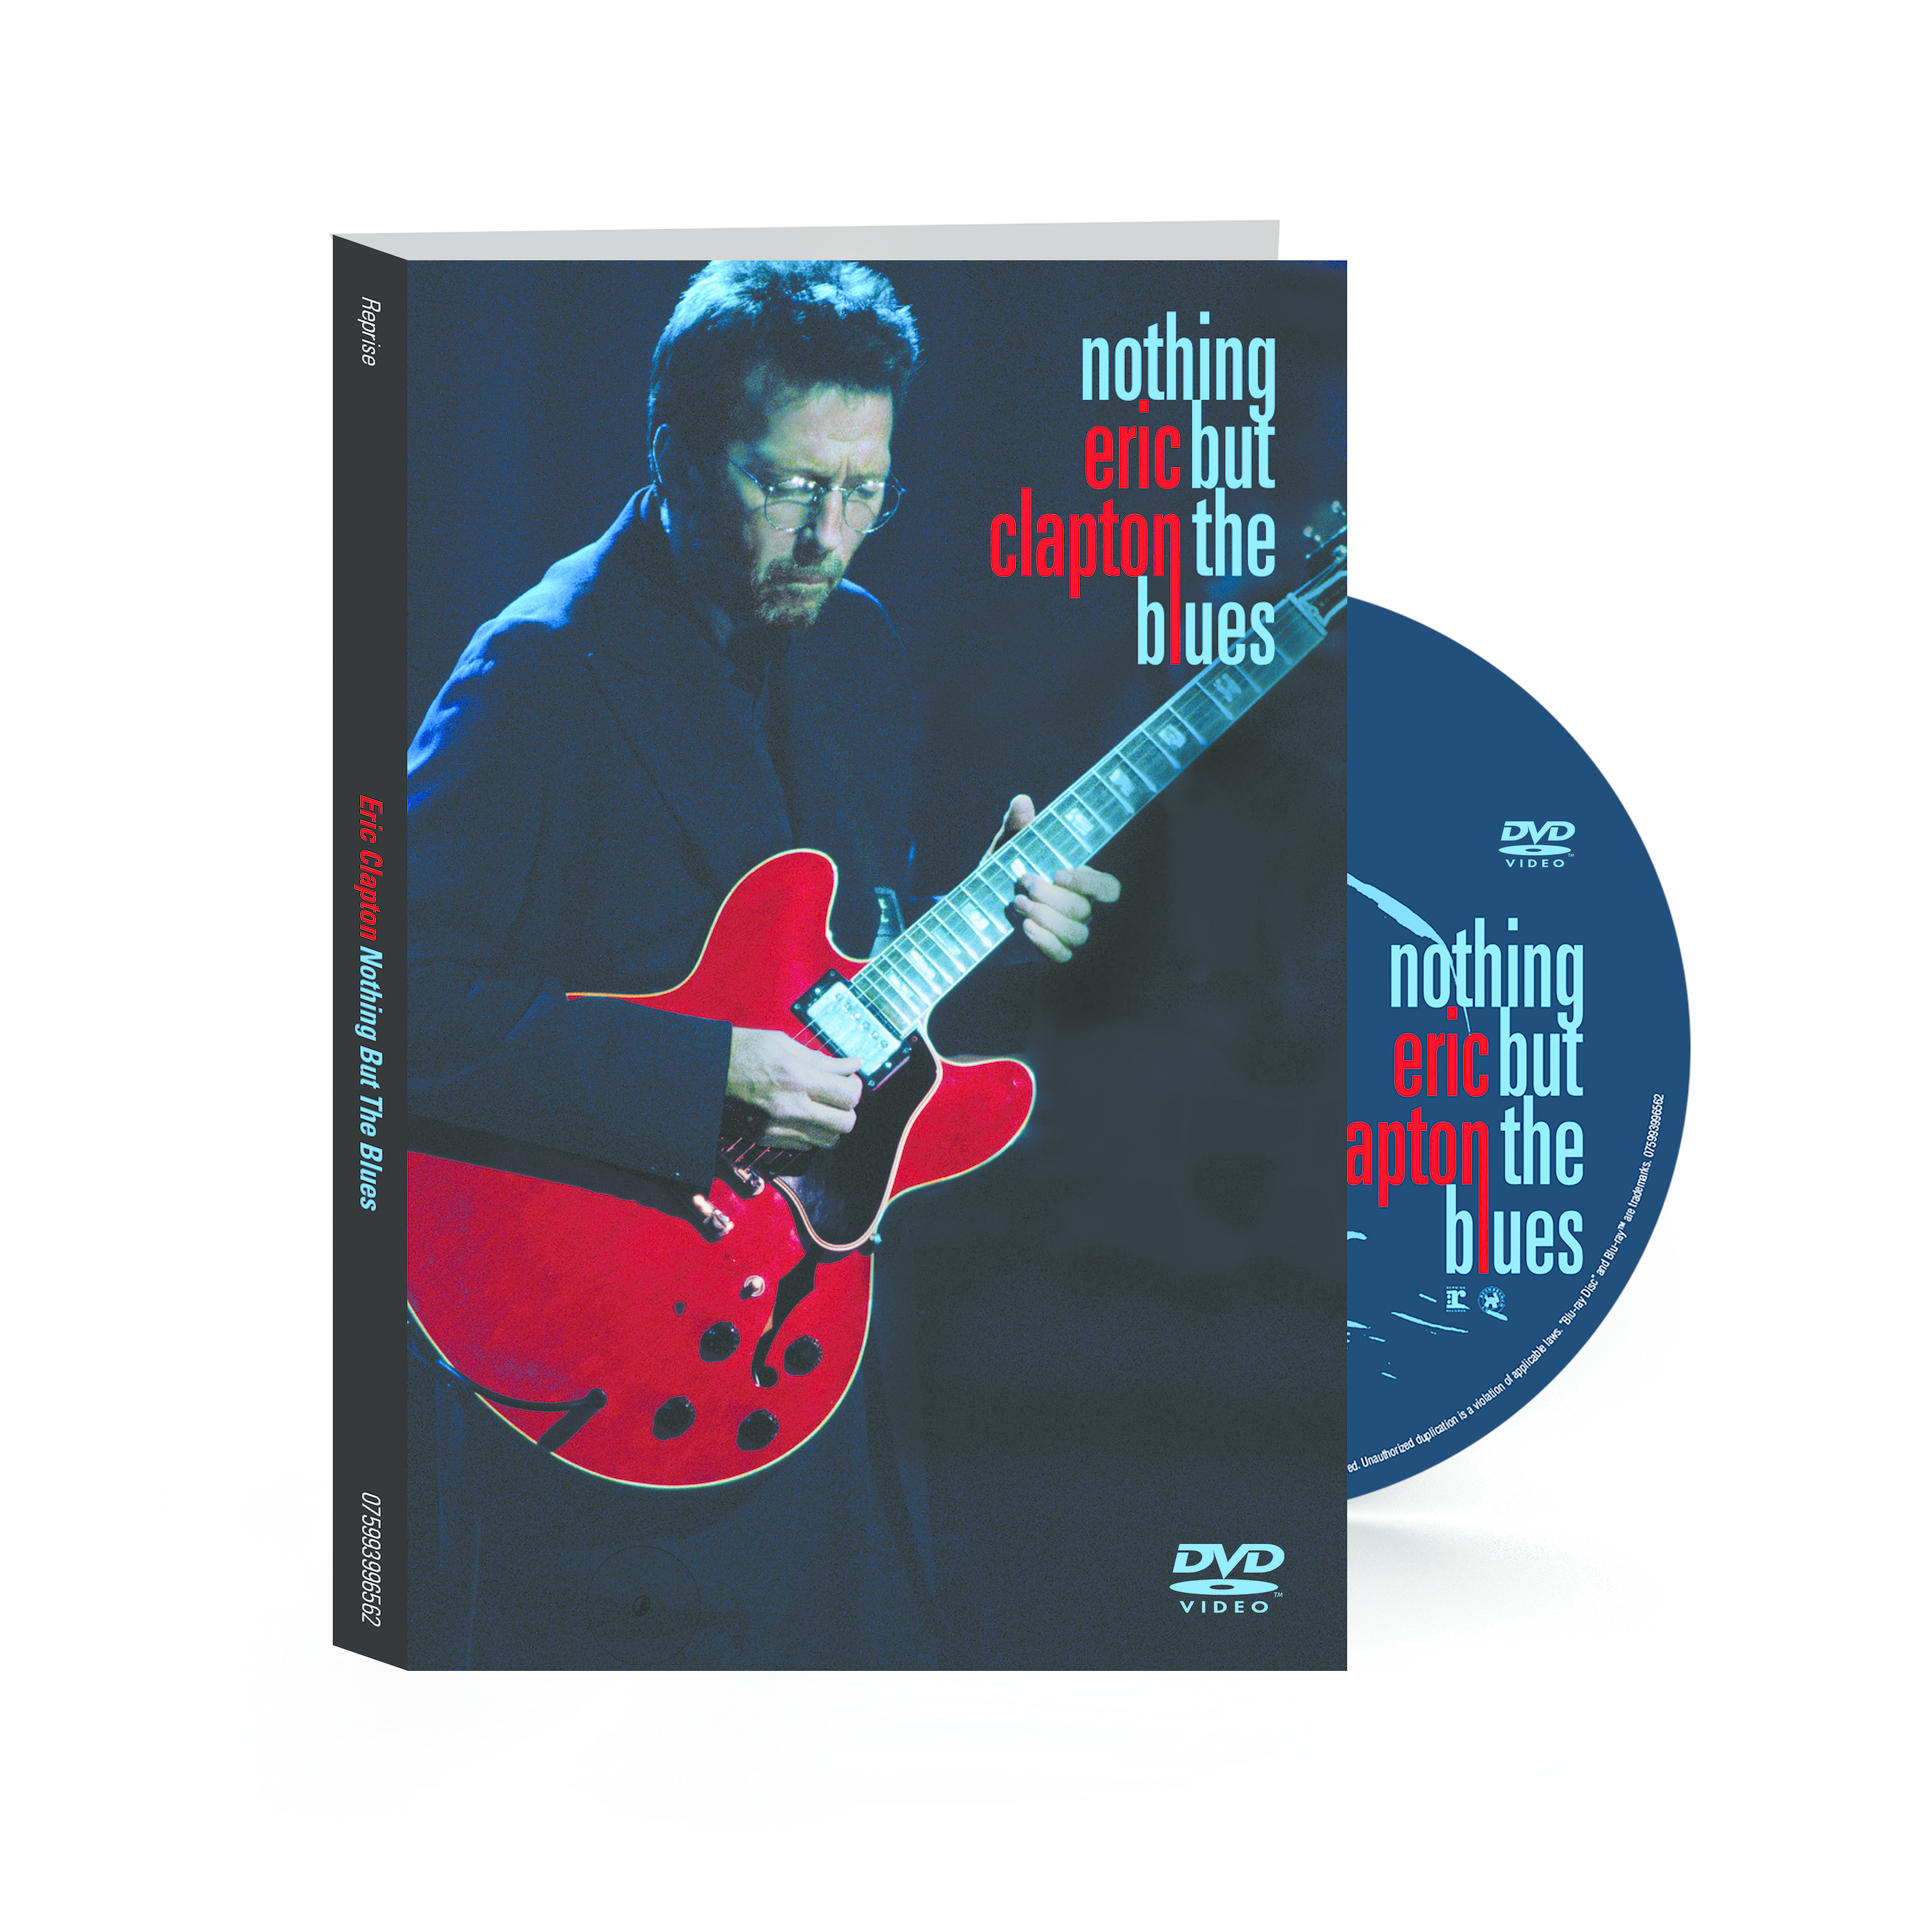 NOTHING (DVD) - - BLUES Clapton THE BUT Eric